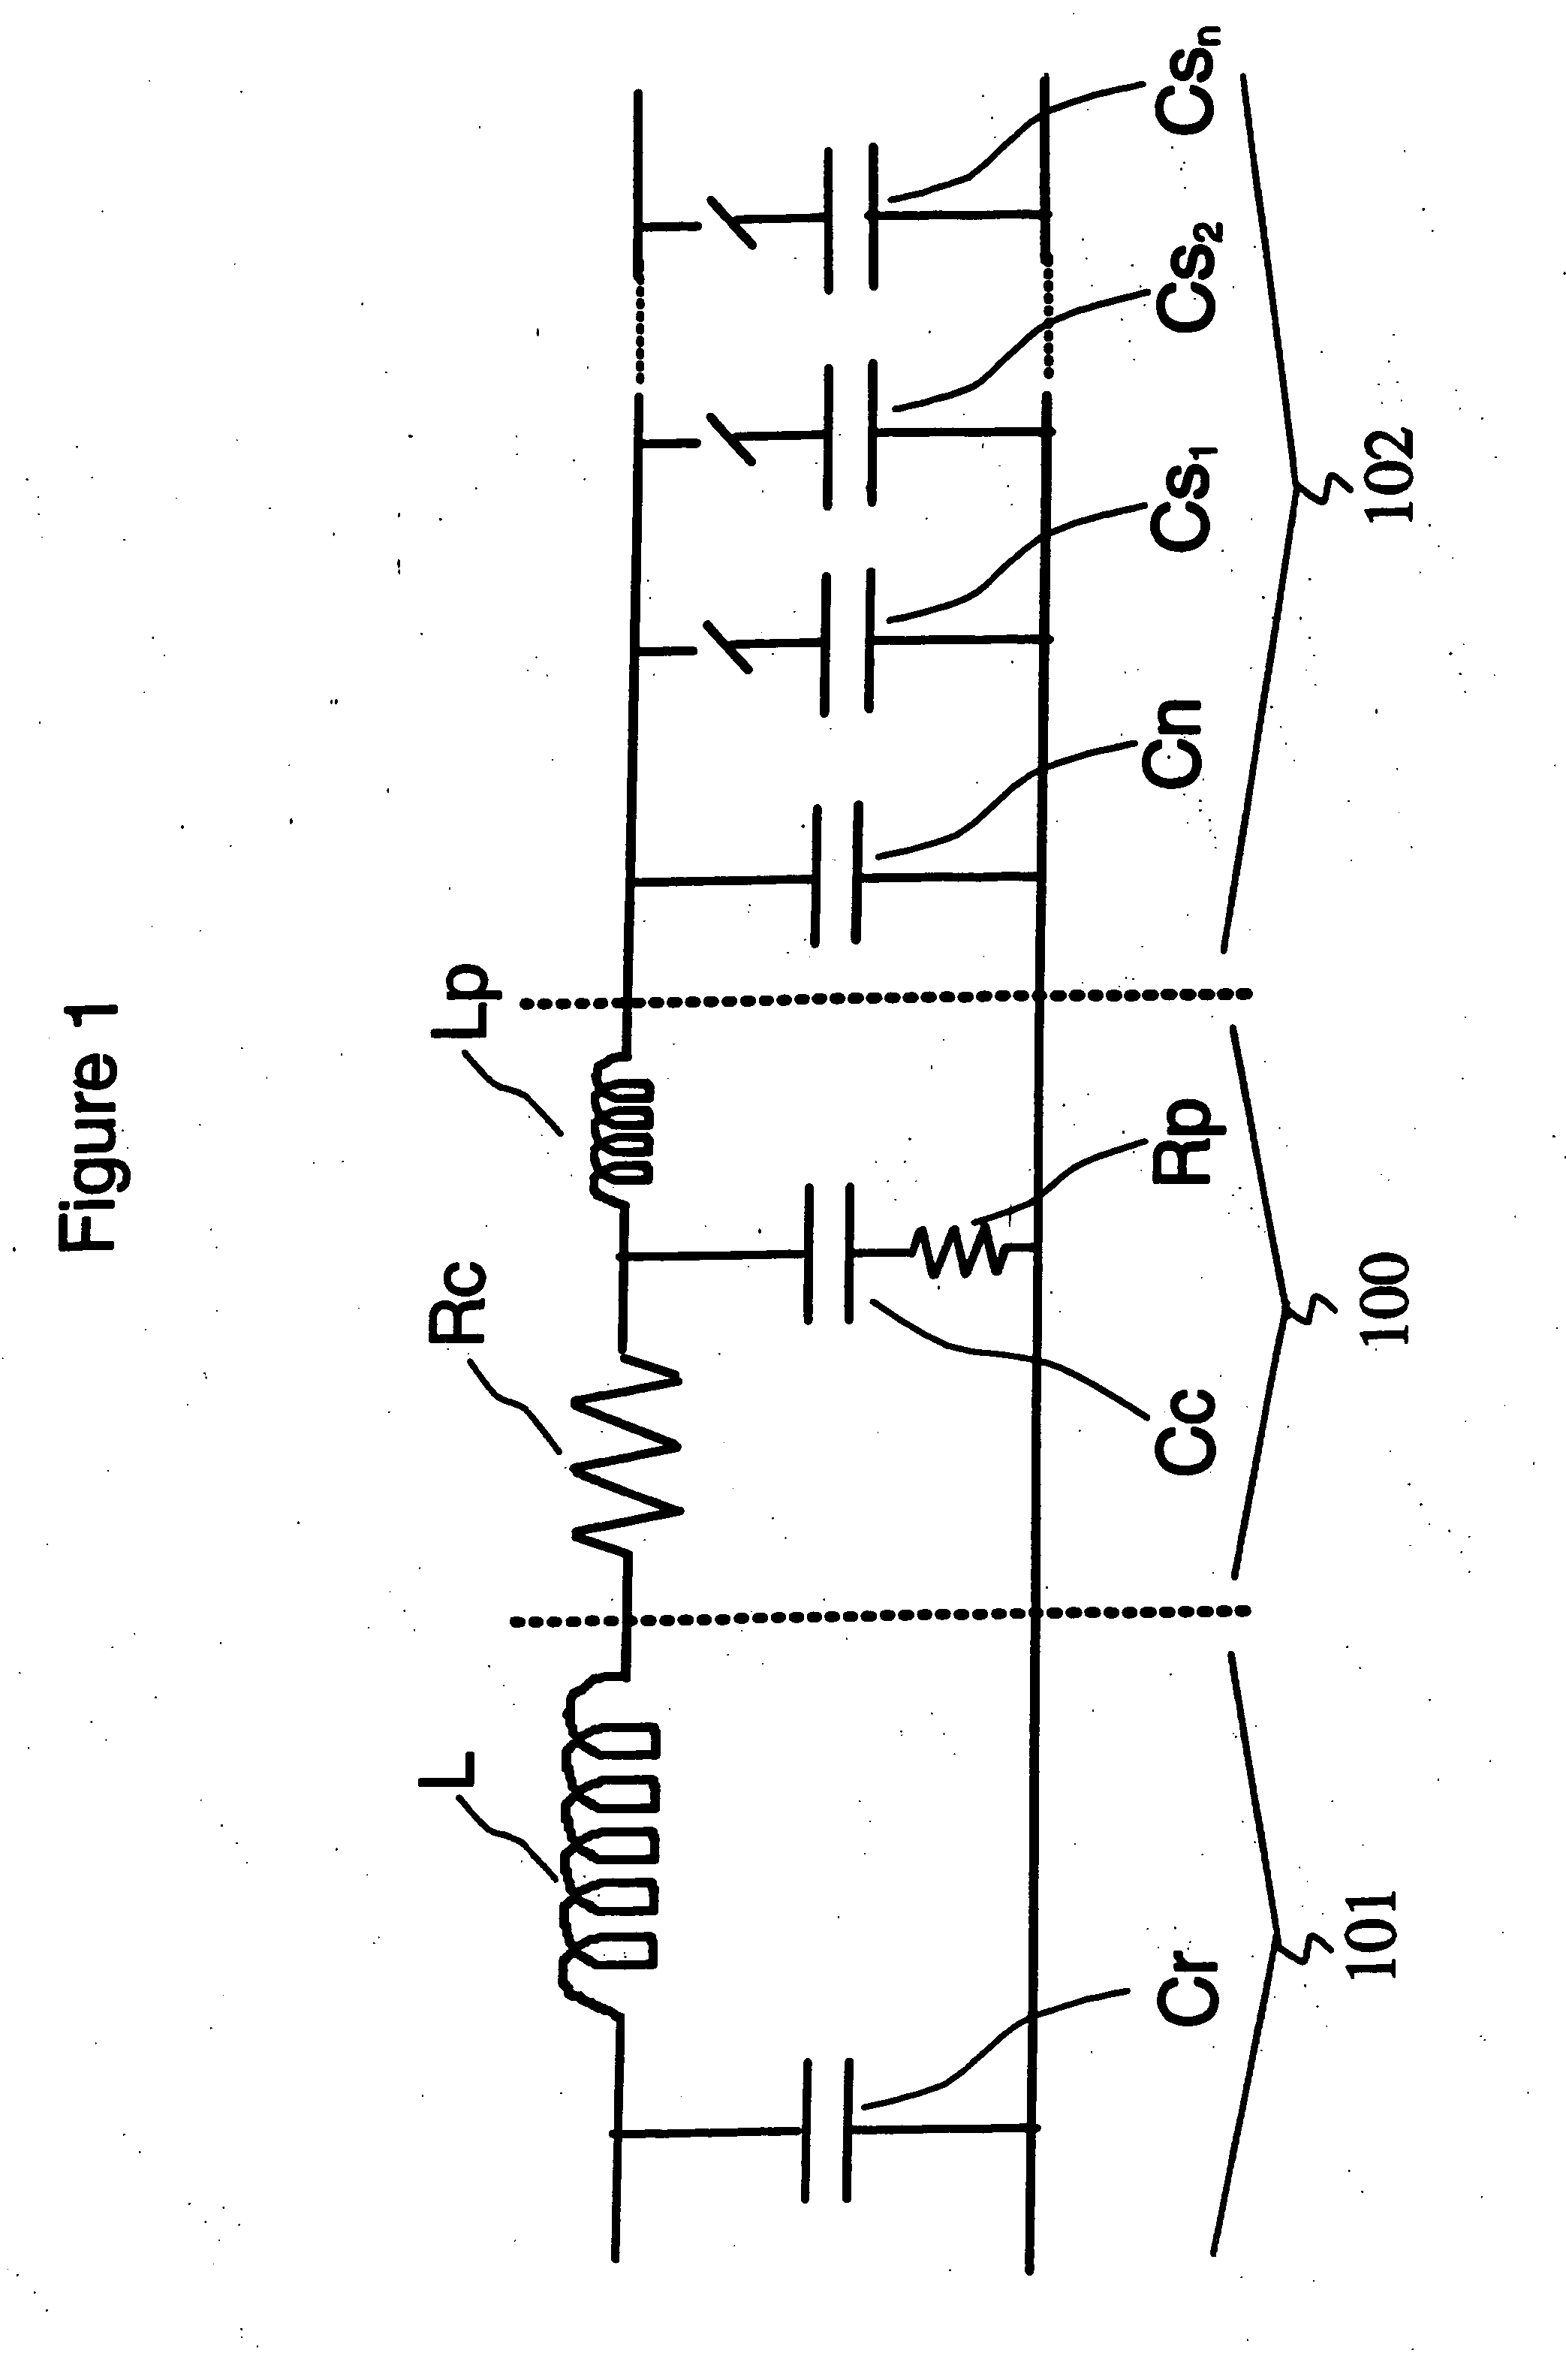 High density chip carrier with integrated passive devices